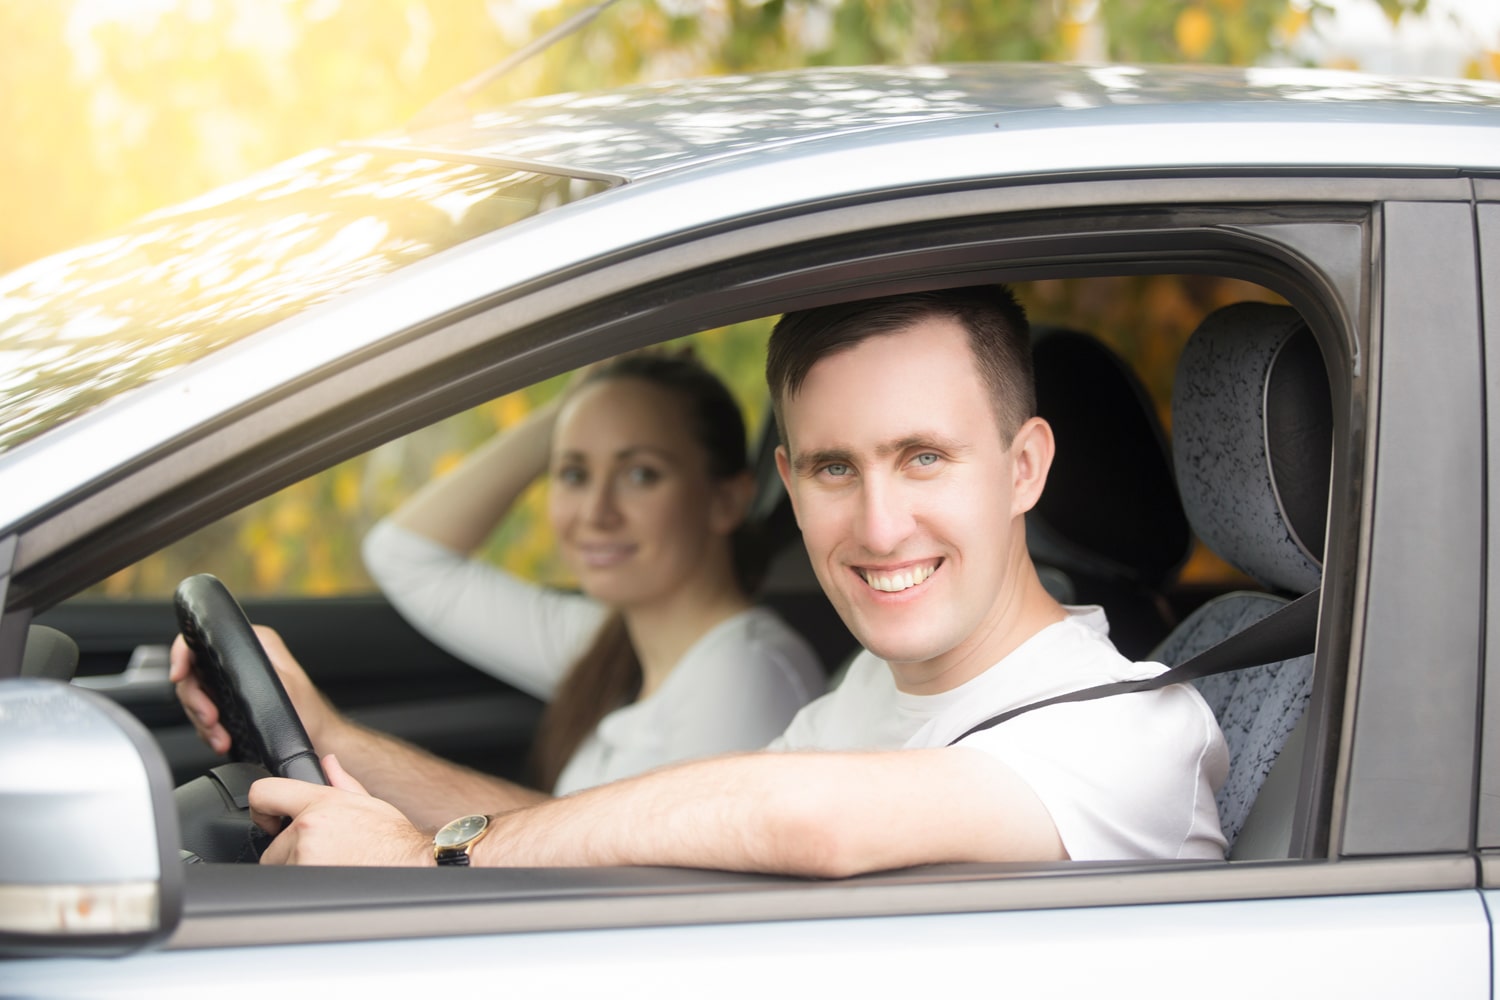 peer-to-peer car driver smiling with passenger